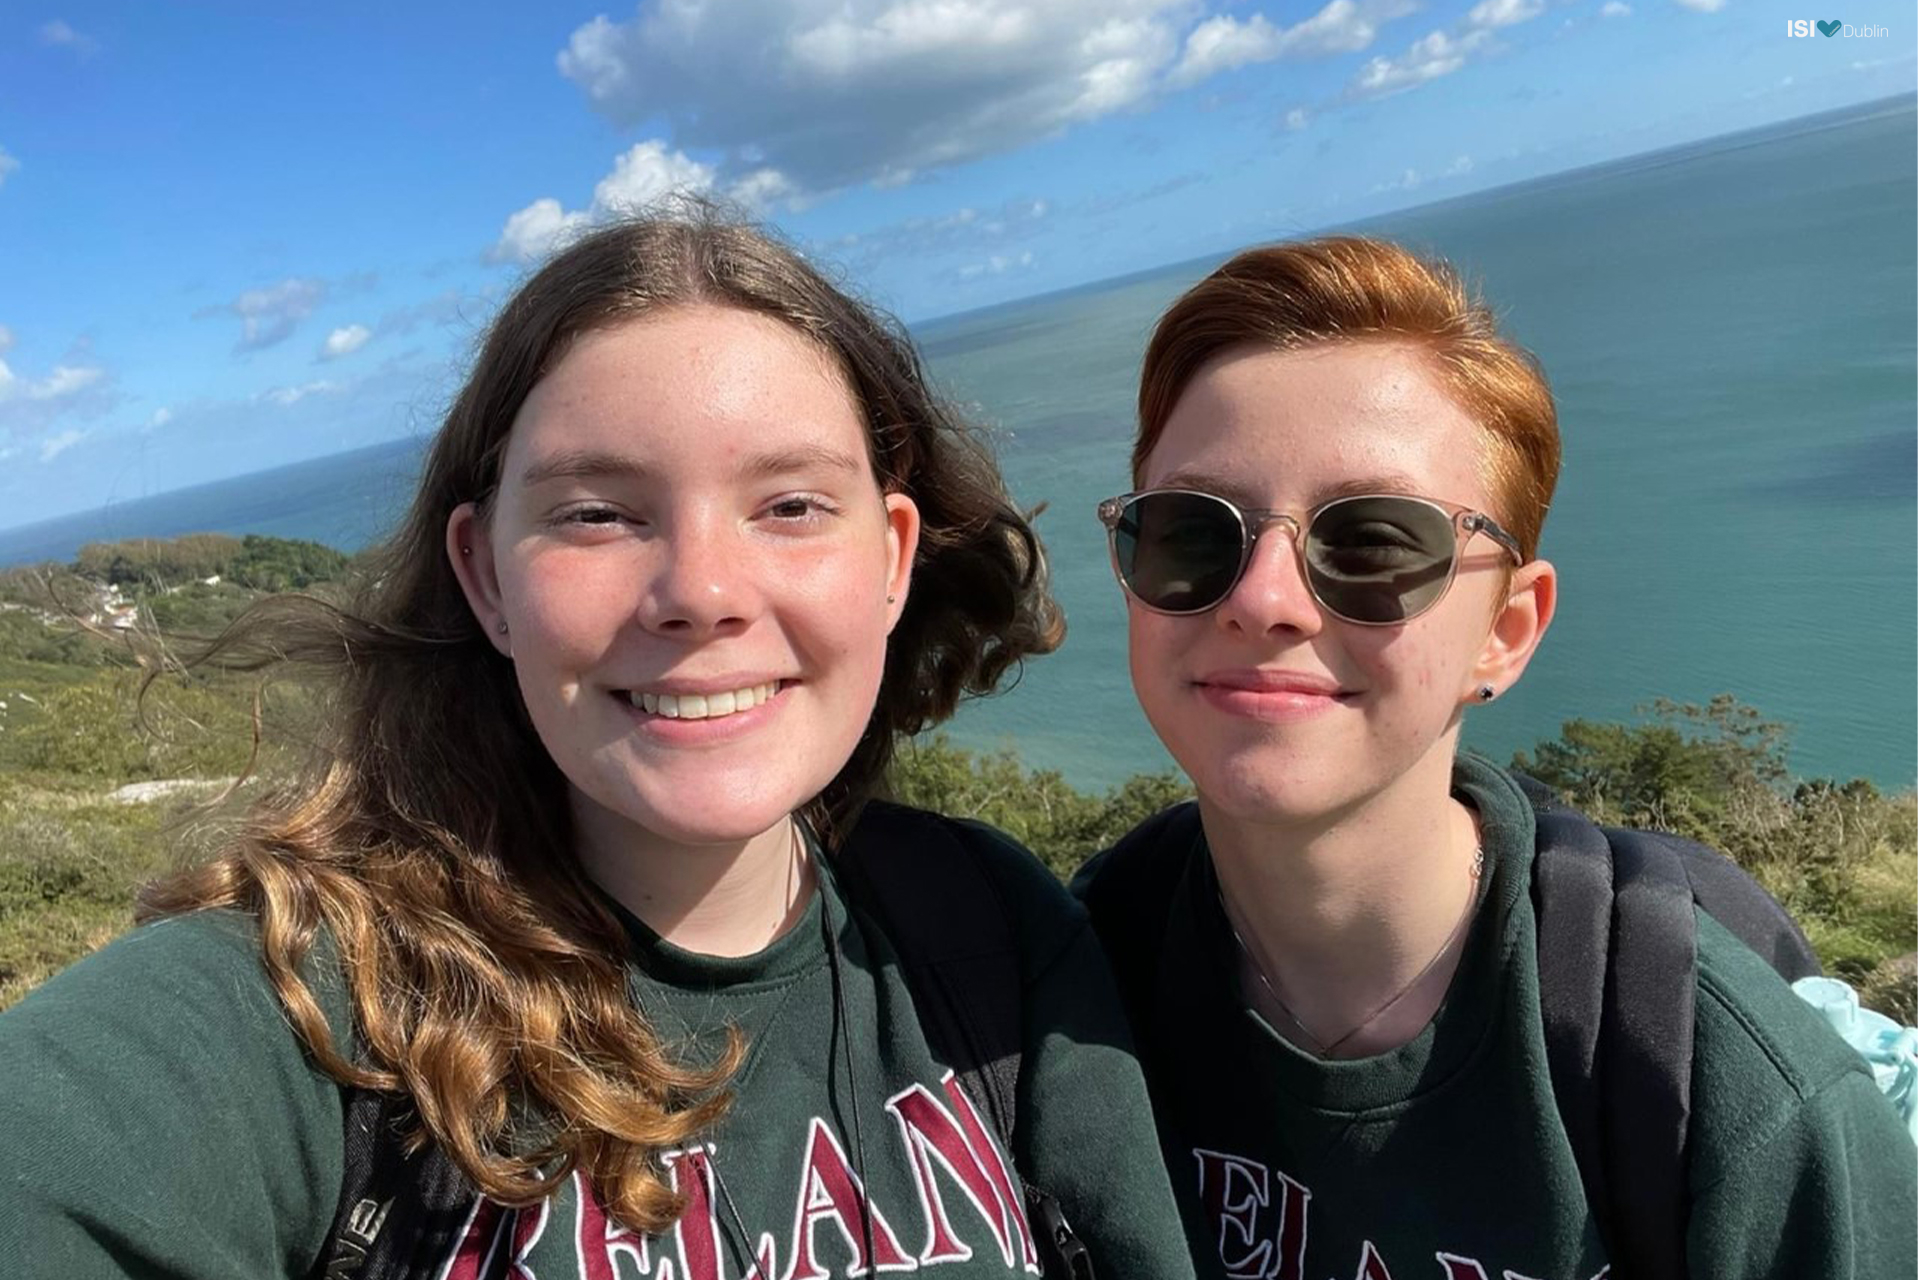 Leona Becker (5th year at St. Finian’s) and Rebecca Bergau (4th year at Manor House) enjoying the sights by the coast on a beautiful sunny day, followed by some much needed retail therapy!